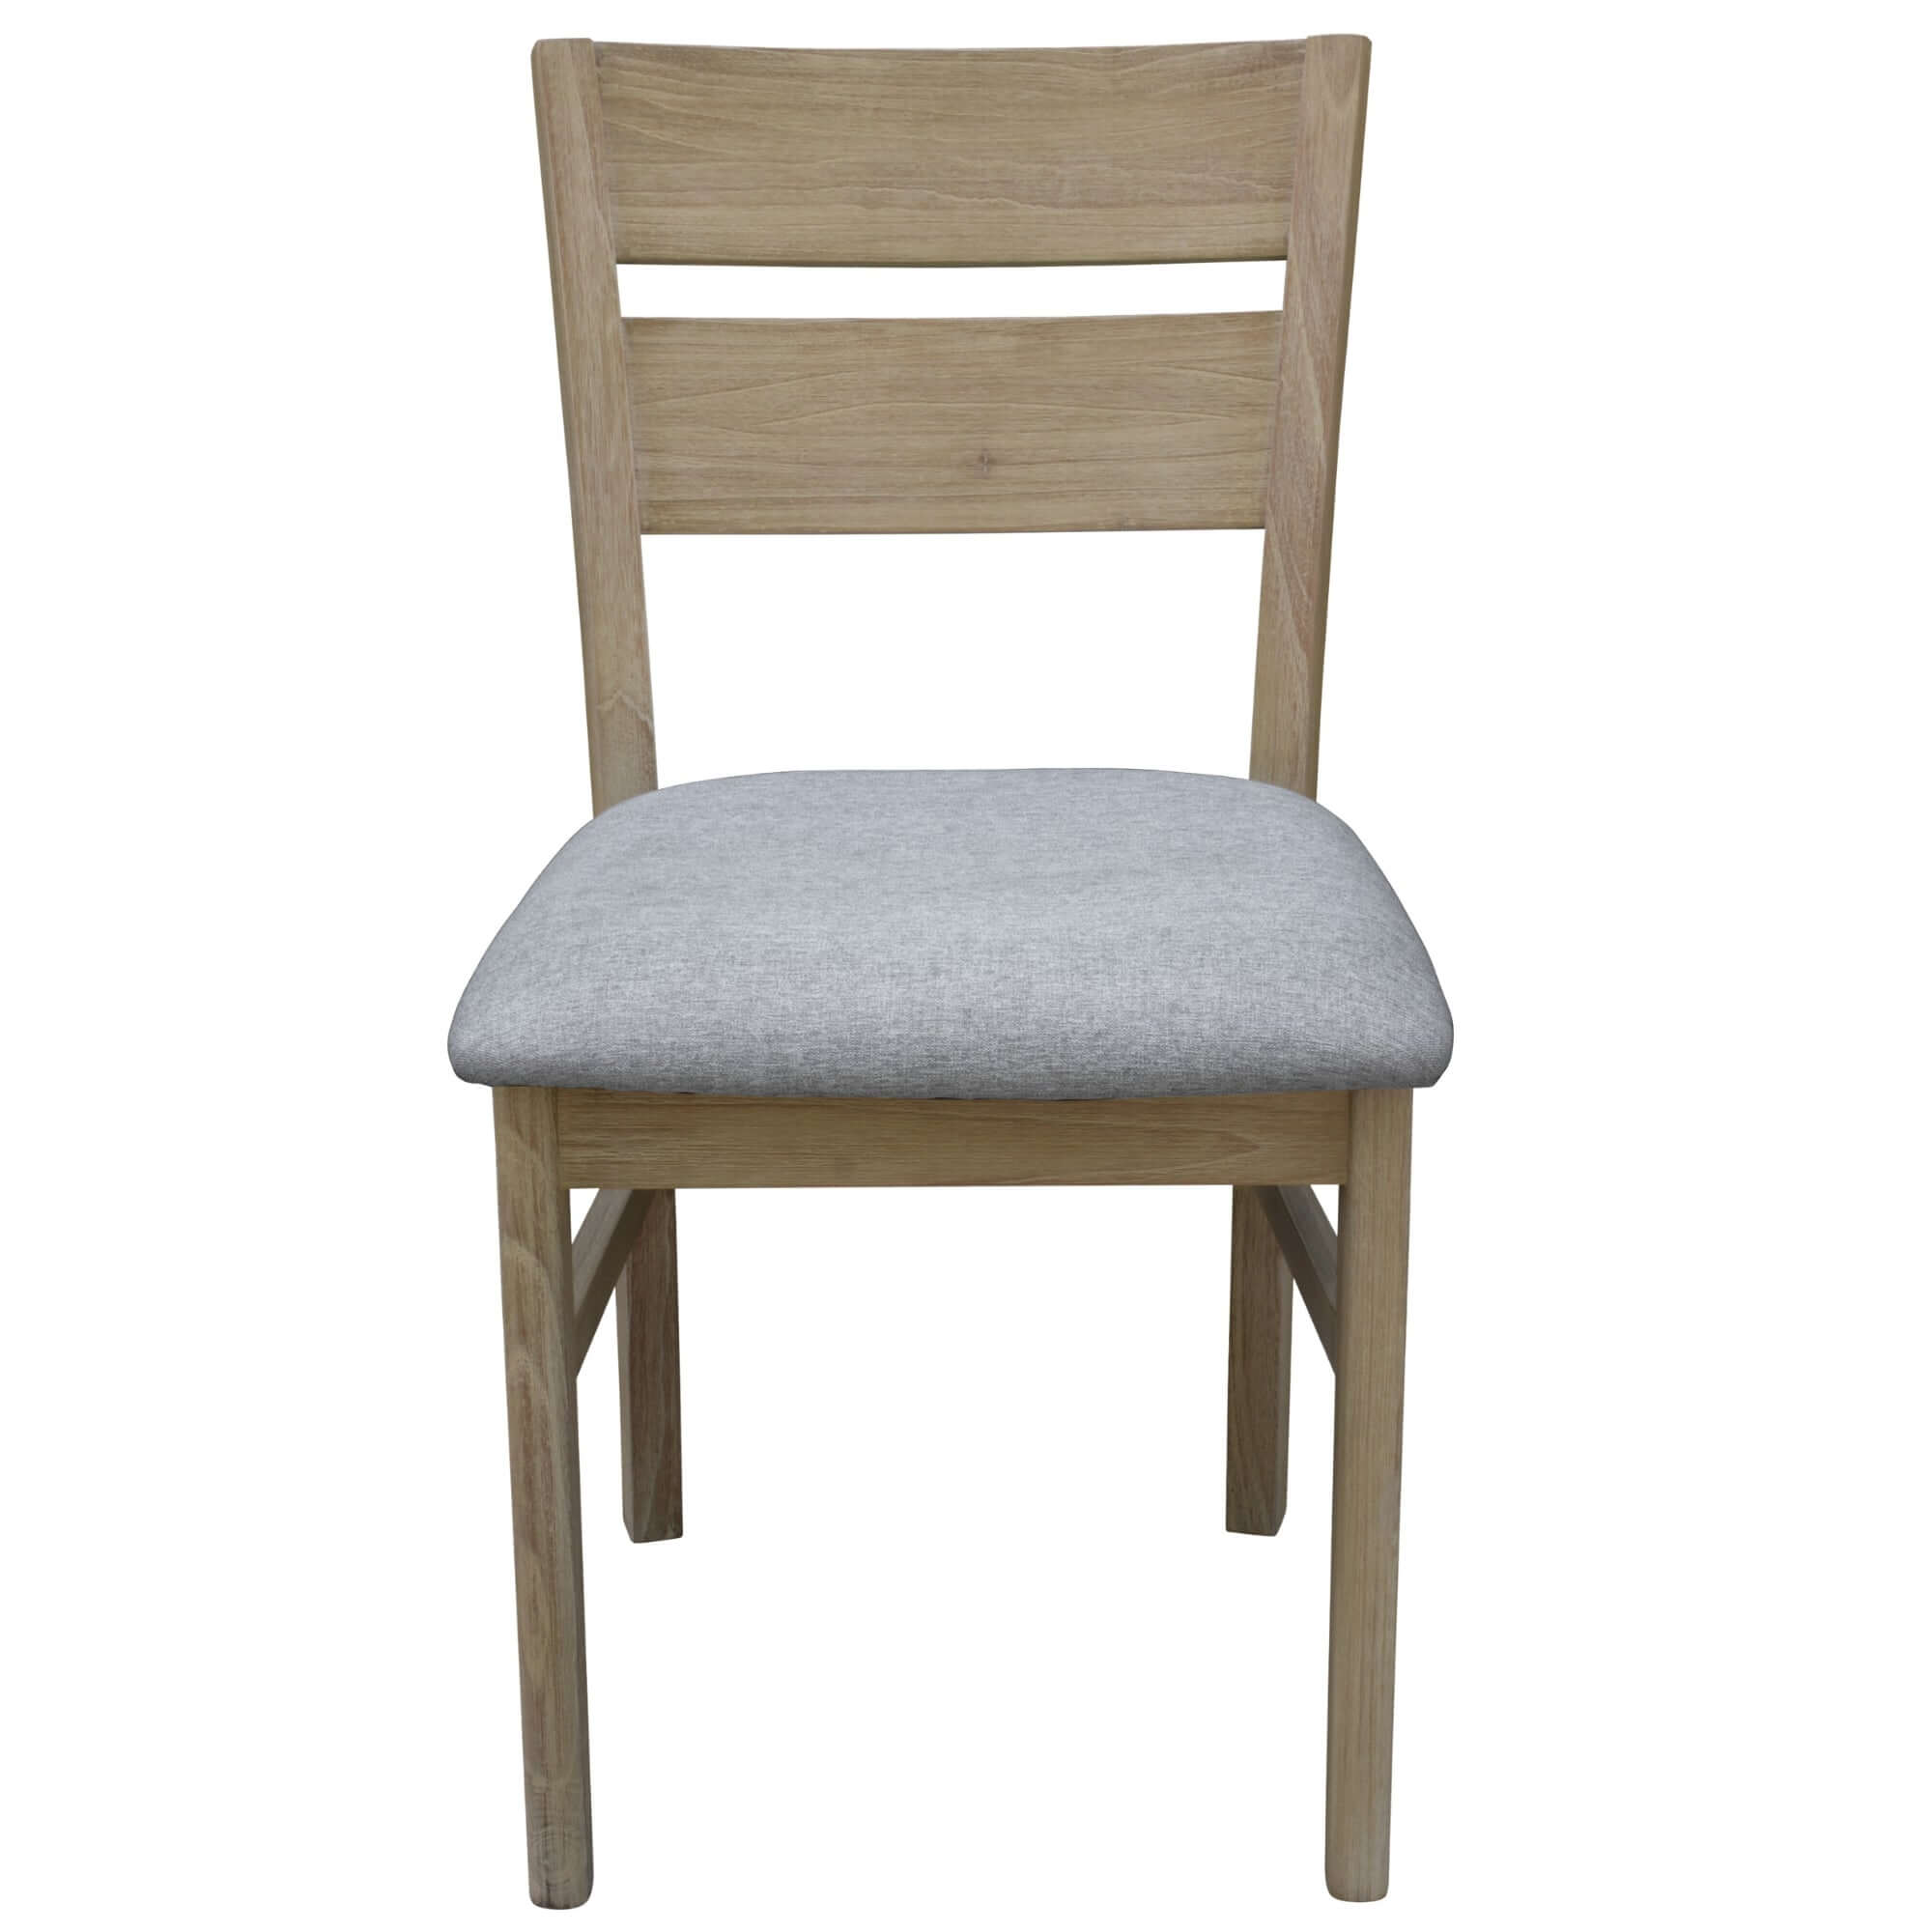 Tyler 6pc Dining Chairs Set - Solid Acacia & Fabric-Upinteriors